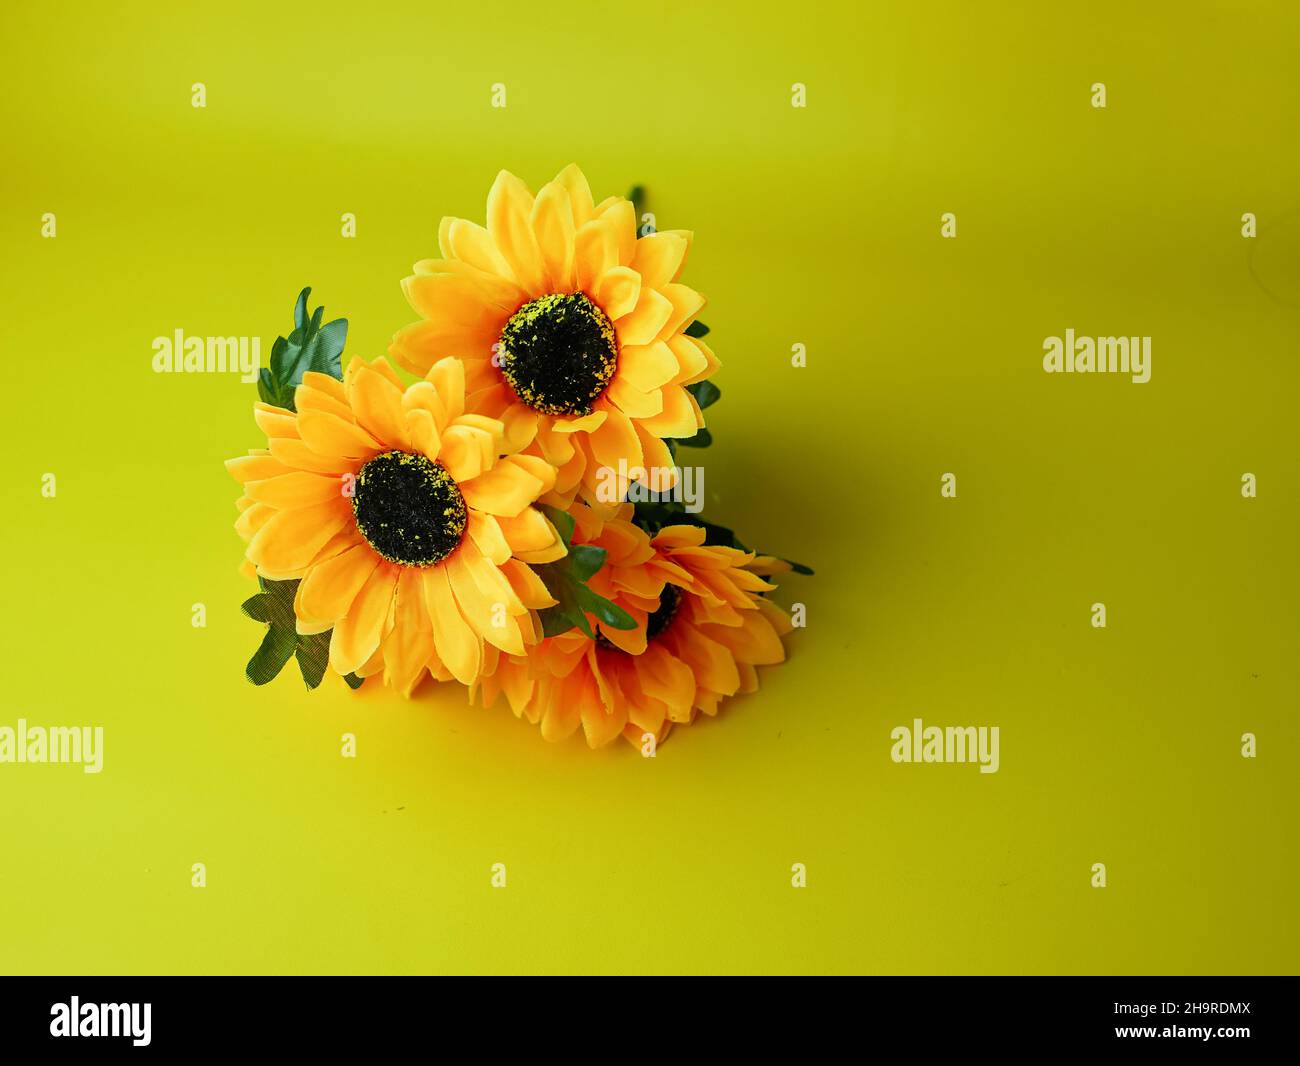 artificial sunflower for decoration isolated on yellow background Stock Photo